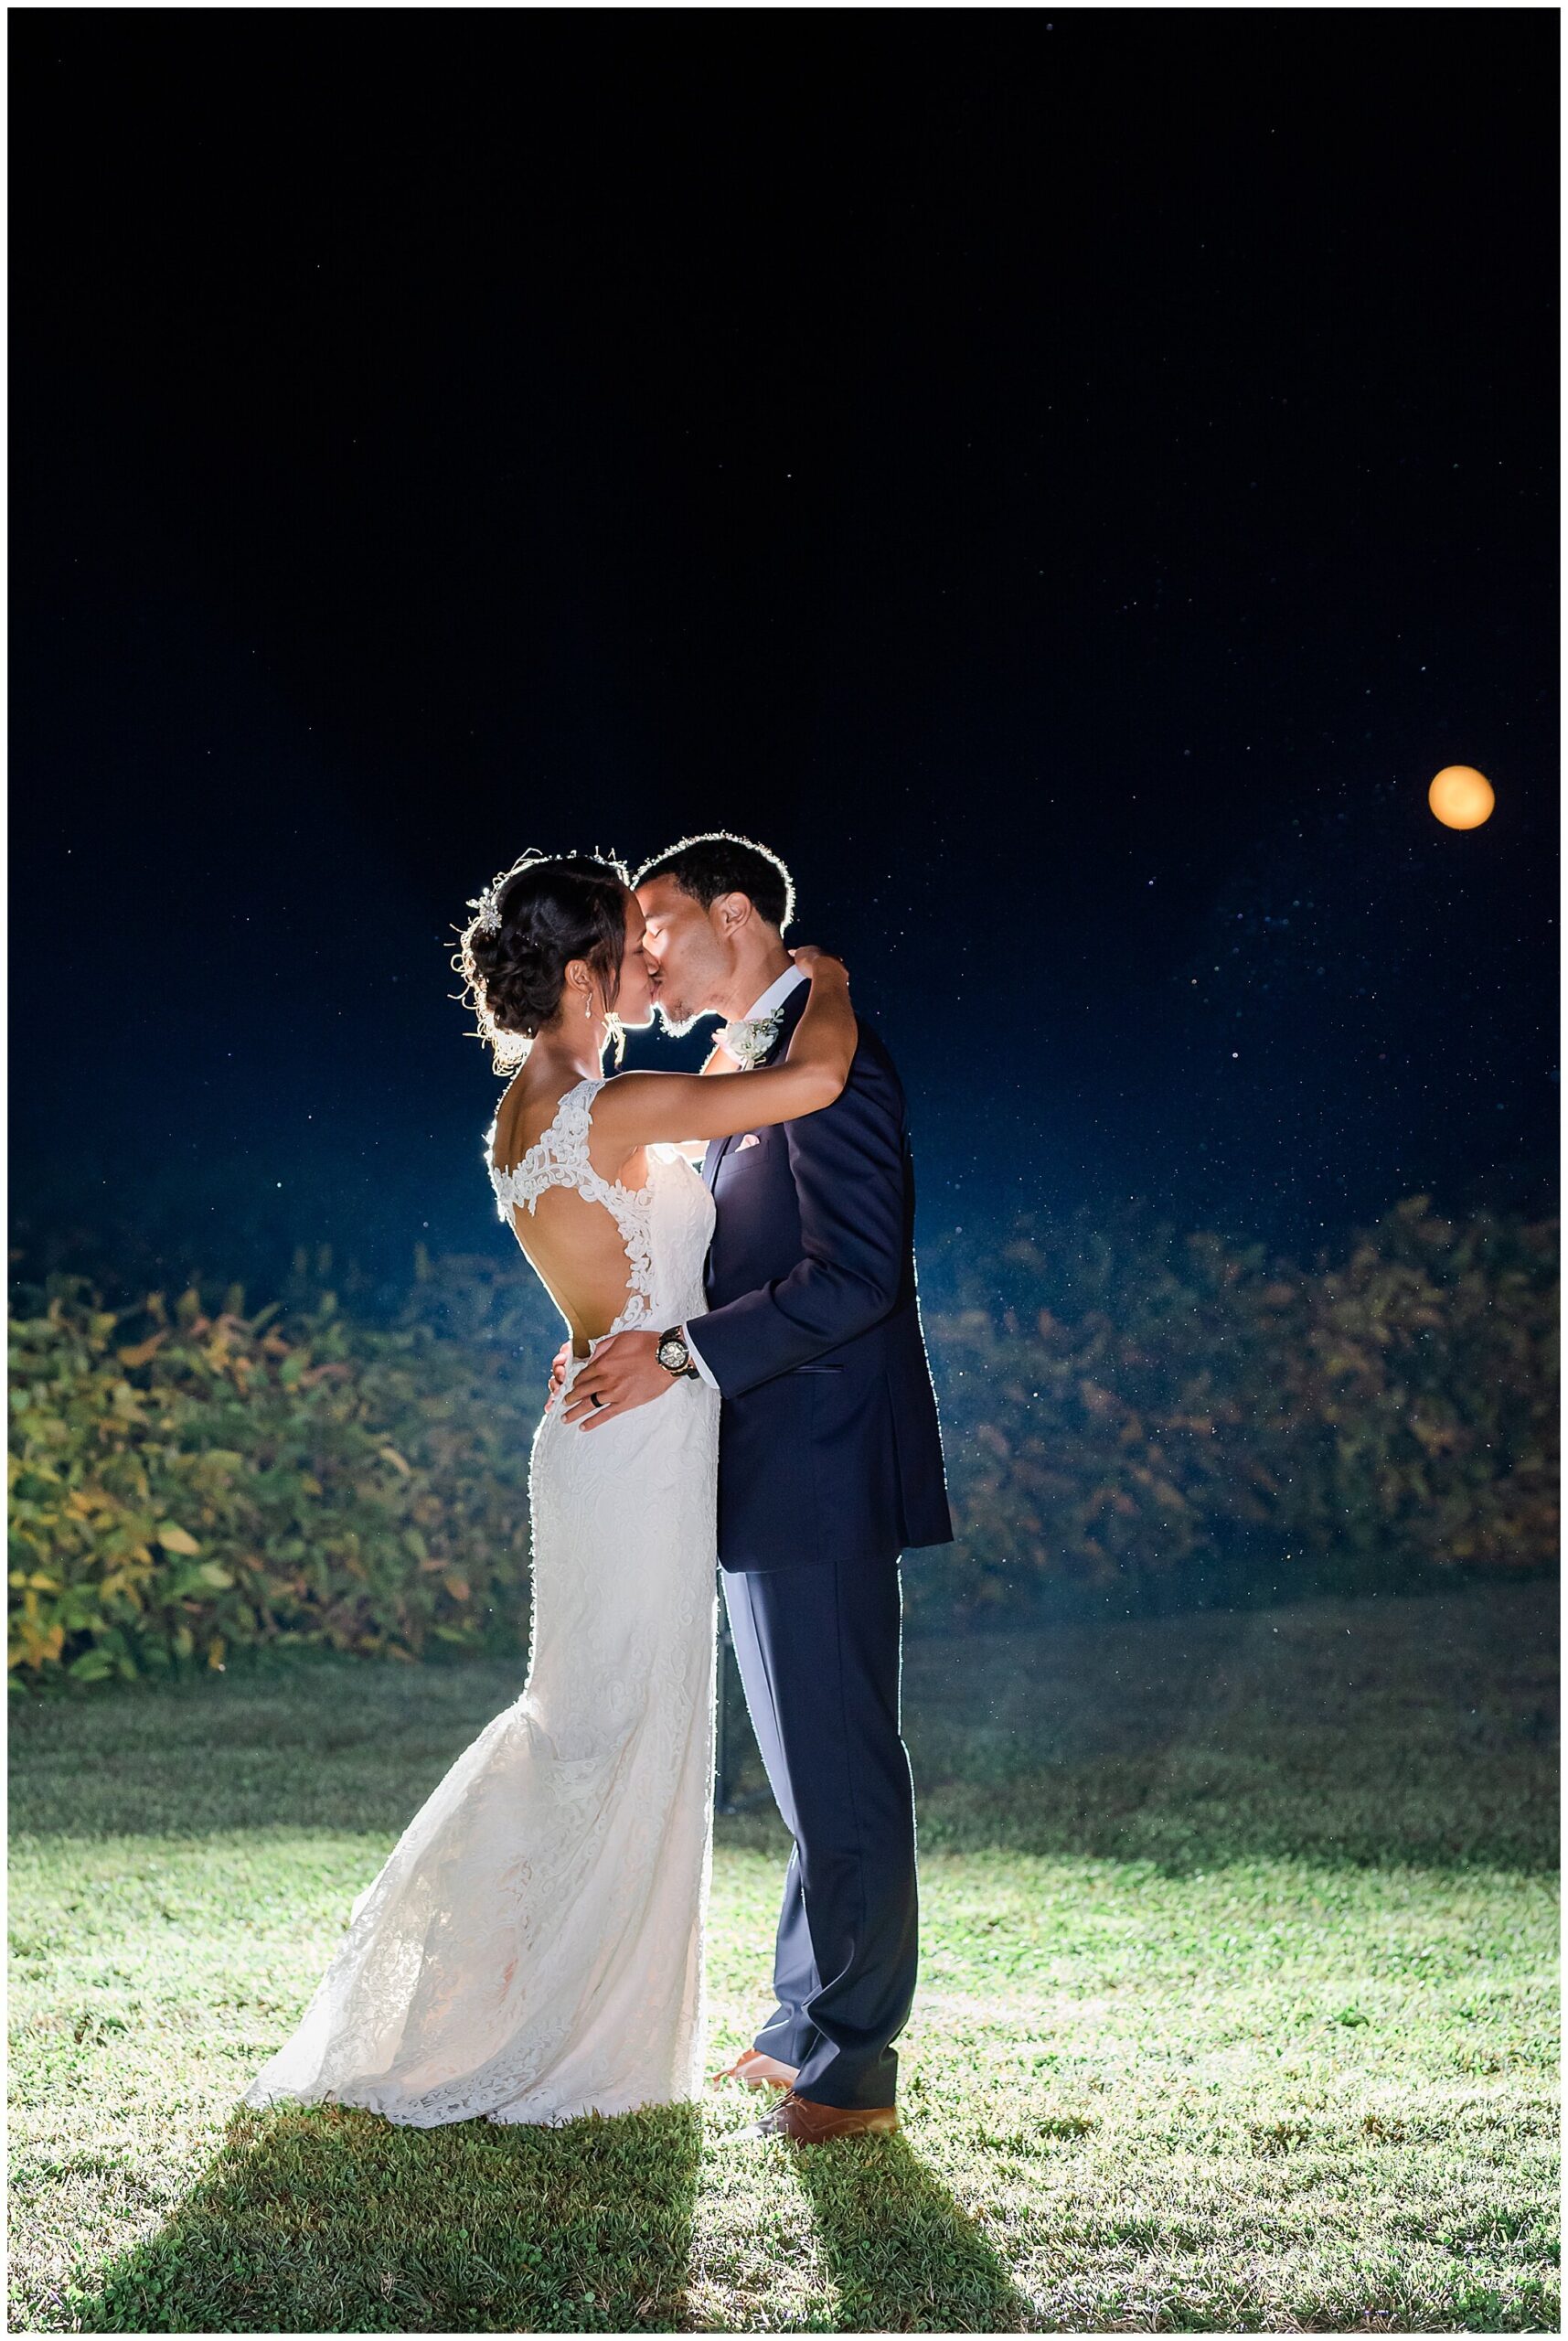 nighttime wedding portrait at The Barns at Timberneck